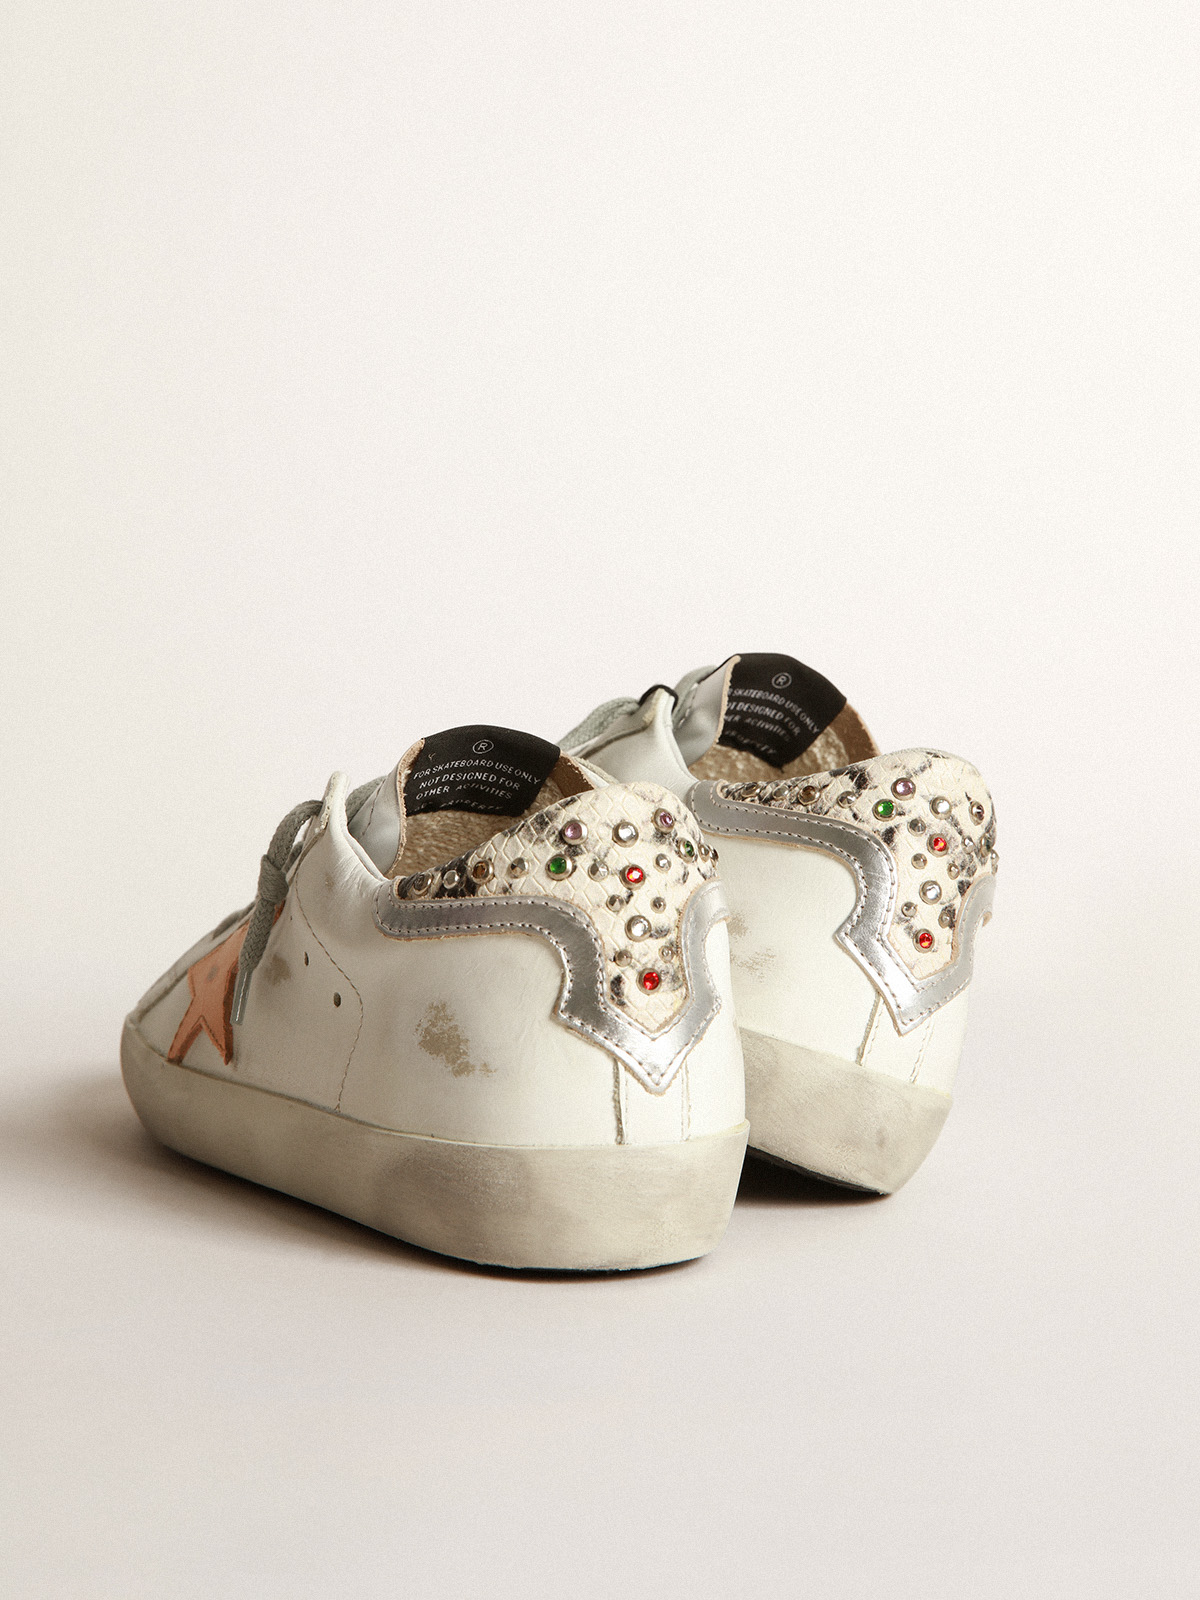 White Super-Star sneakers with python-print and rhinestone heel tab |  Golden Goose